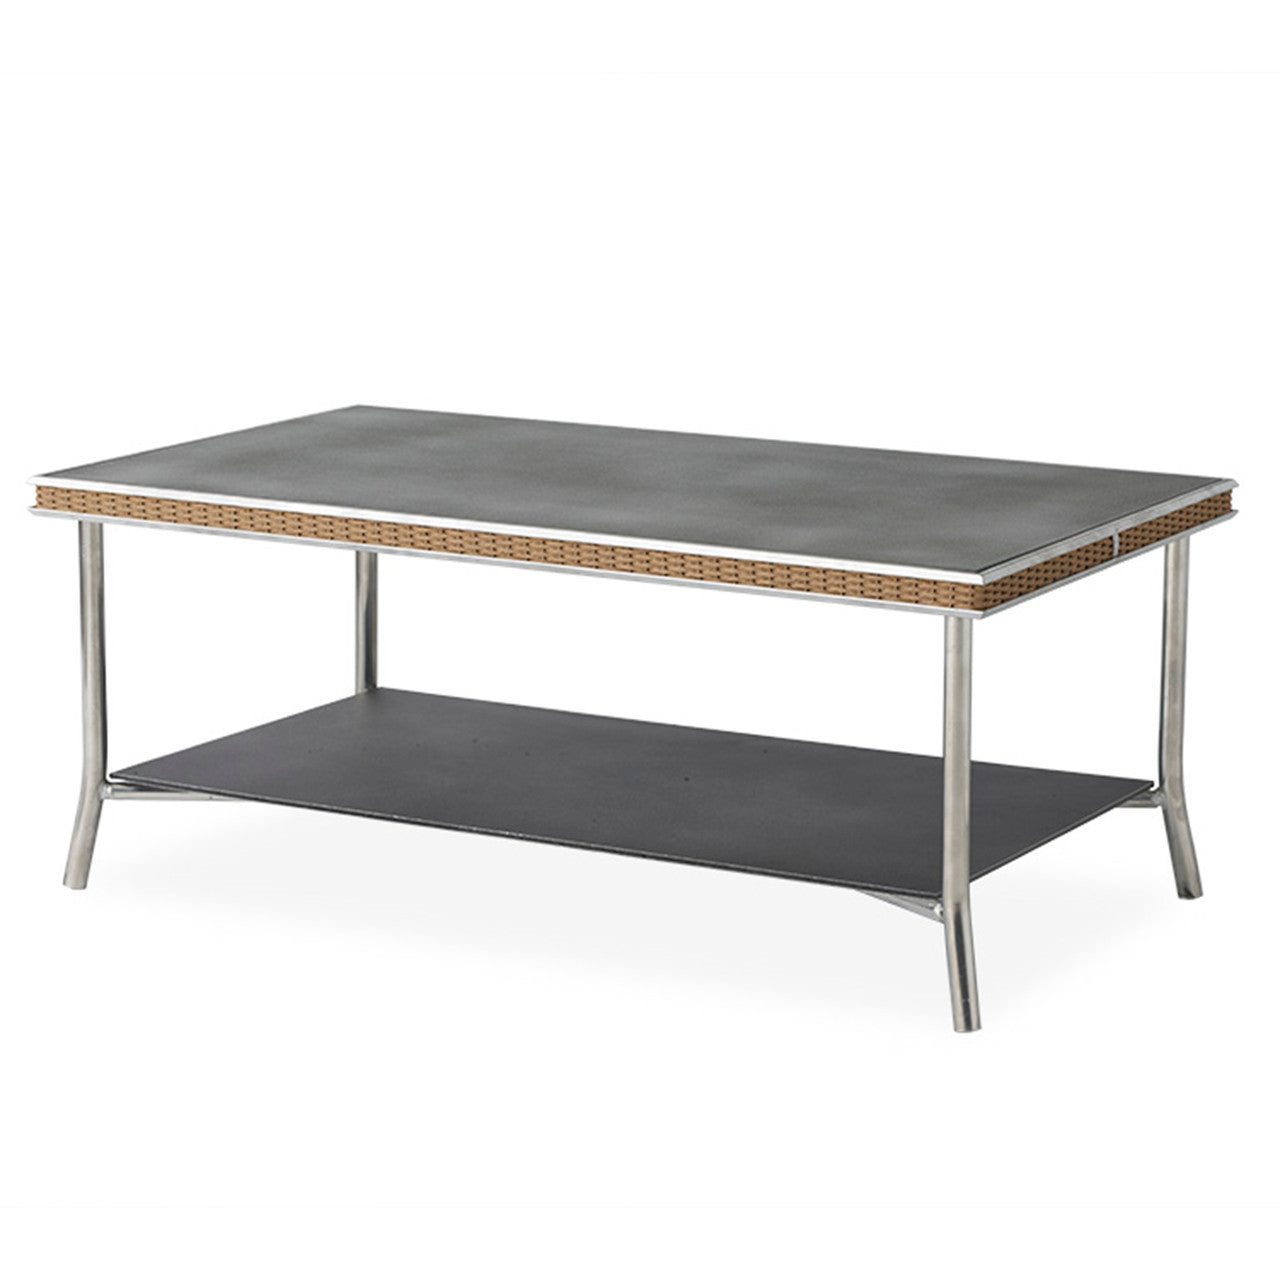 Lloyd Flanders Visions 42" Rectangular Cocktail Table with Charcoal Glass